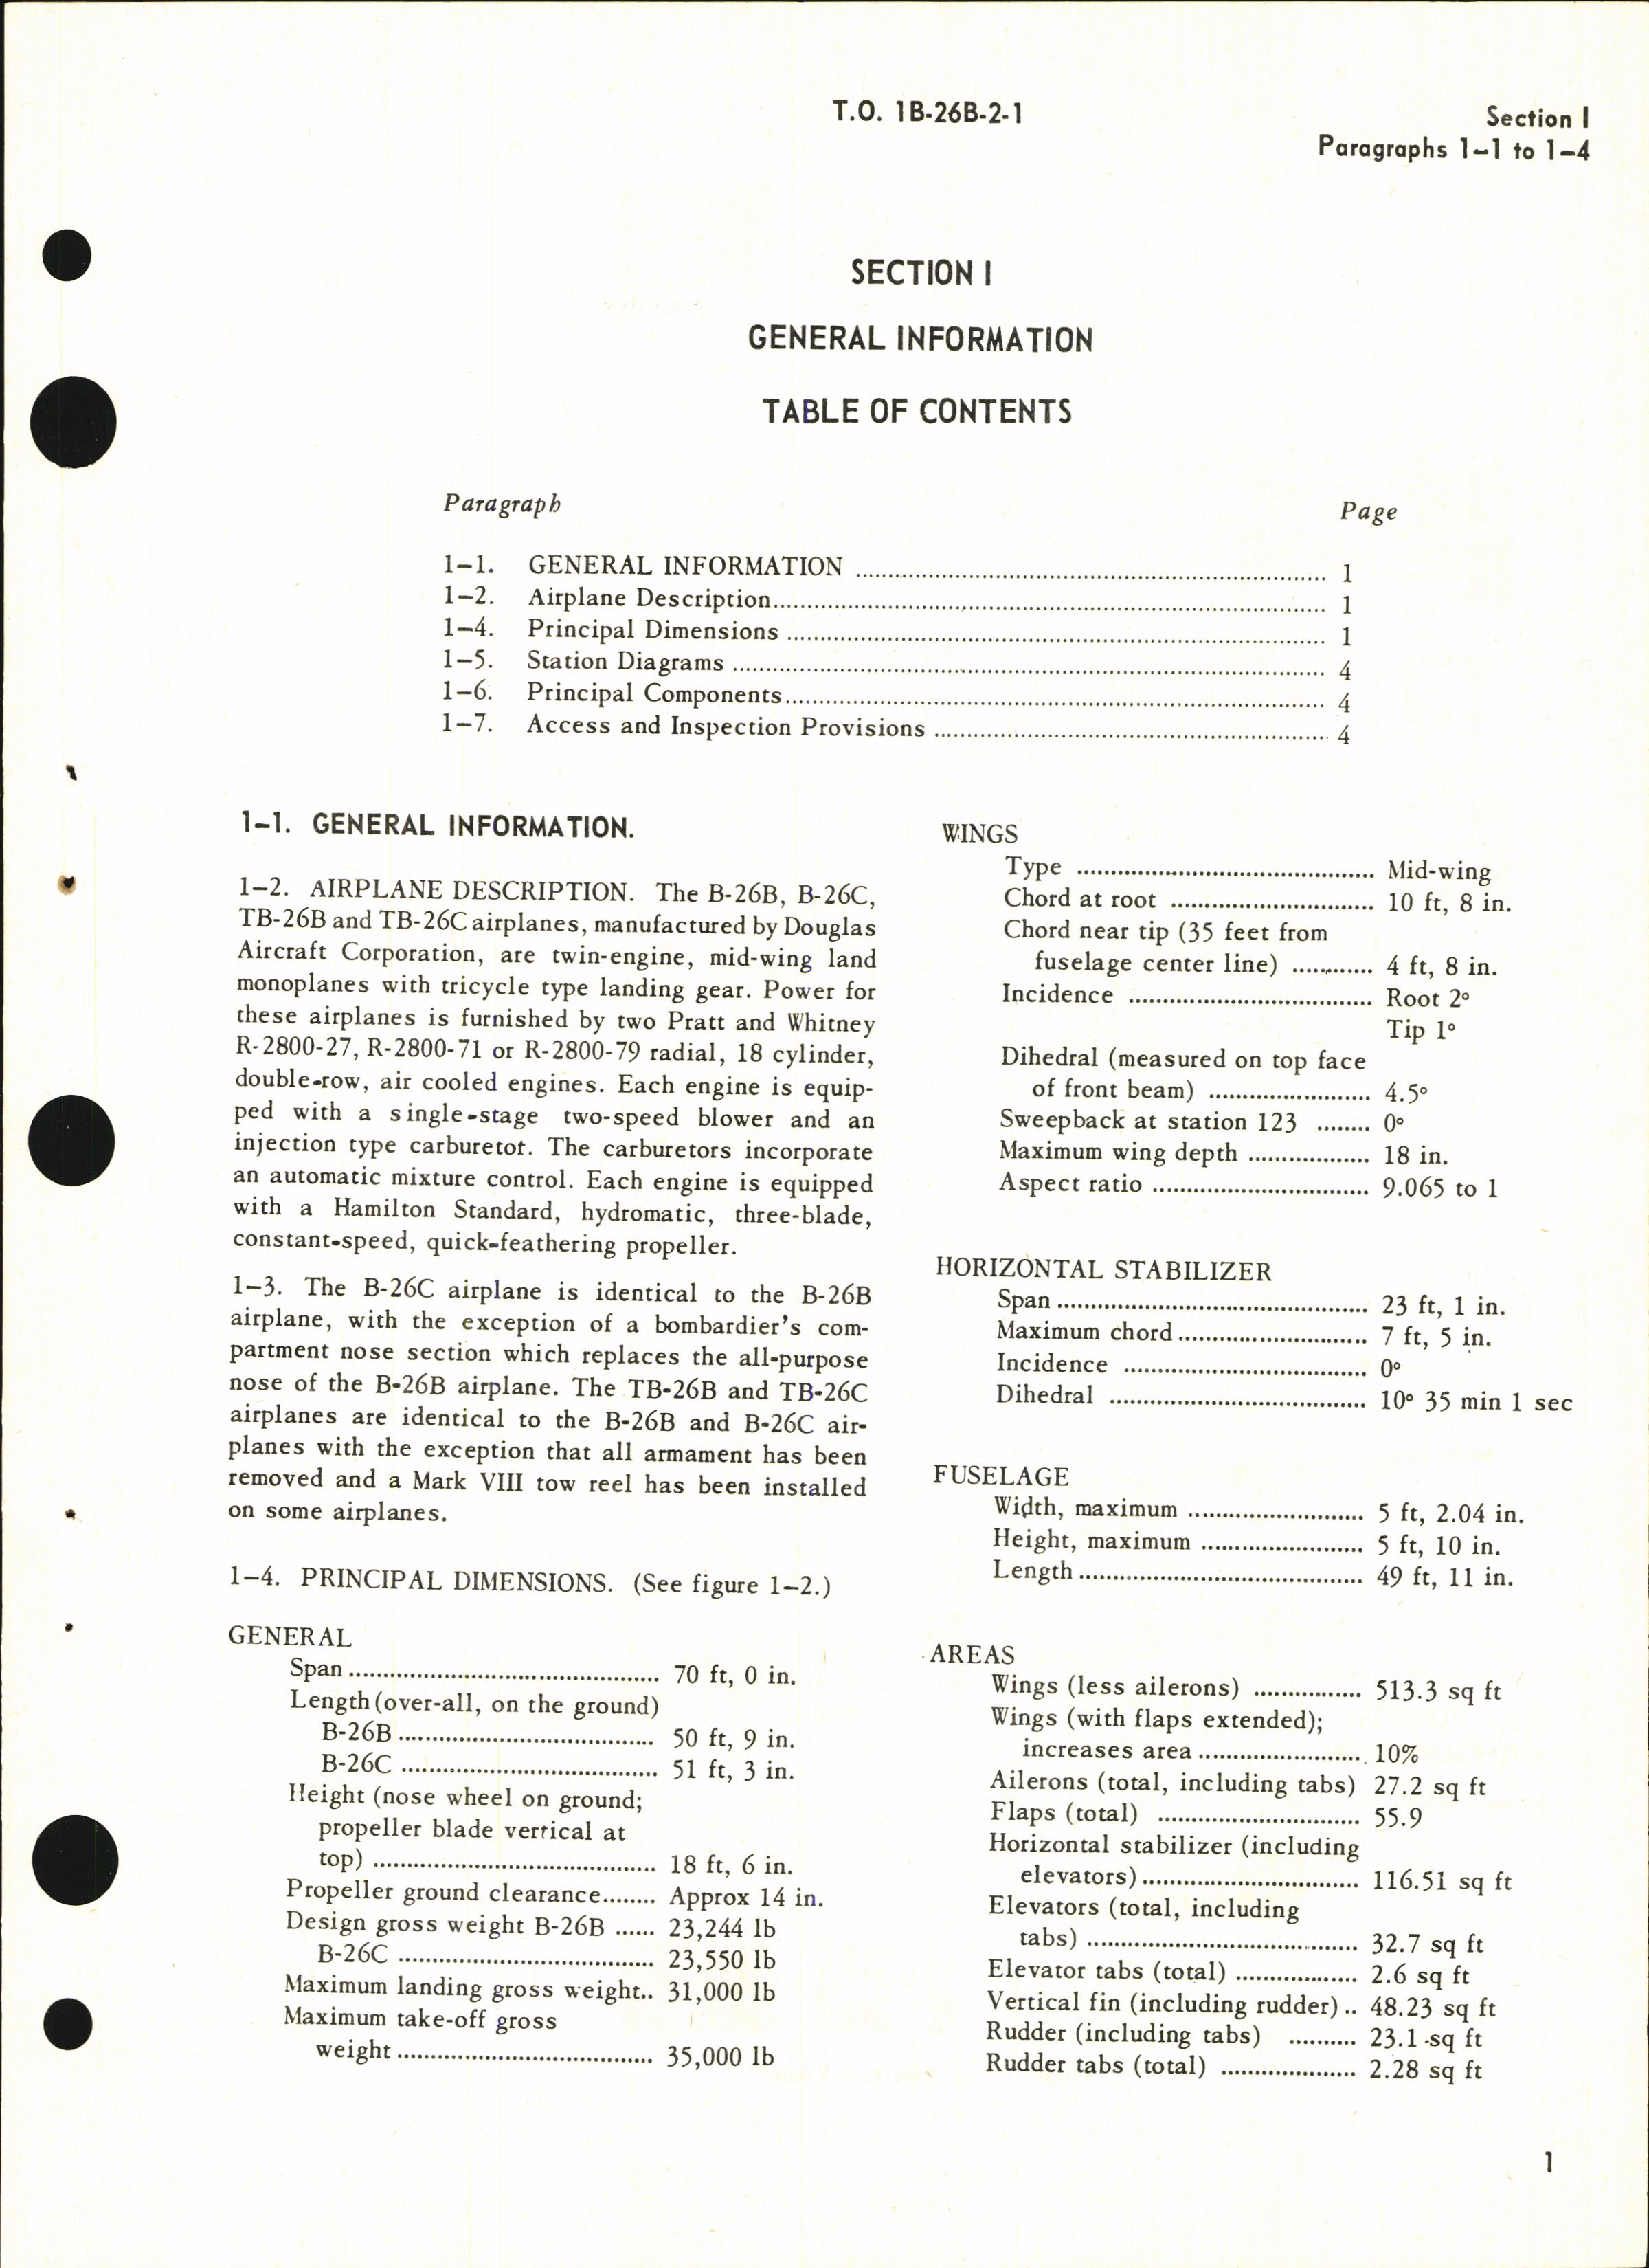 Sample page 7 from AirCorps Library document: Maintenance Instructions for B-26B, B-26C, TB-26B, TB-26C, and JD-1 - General Airplane